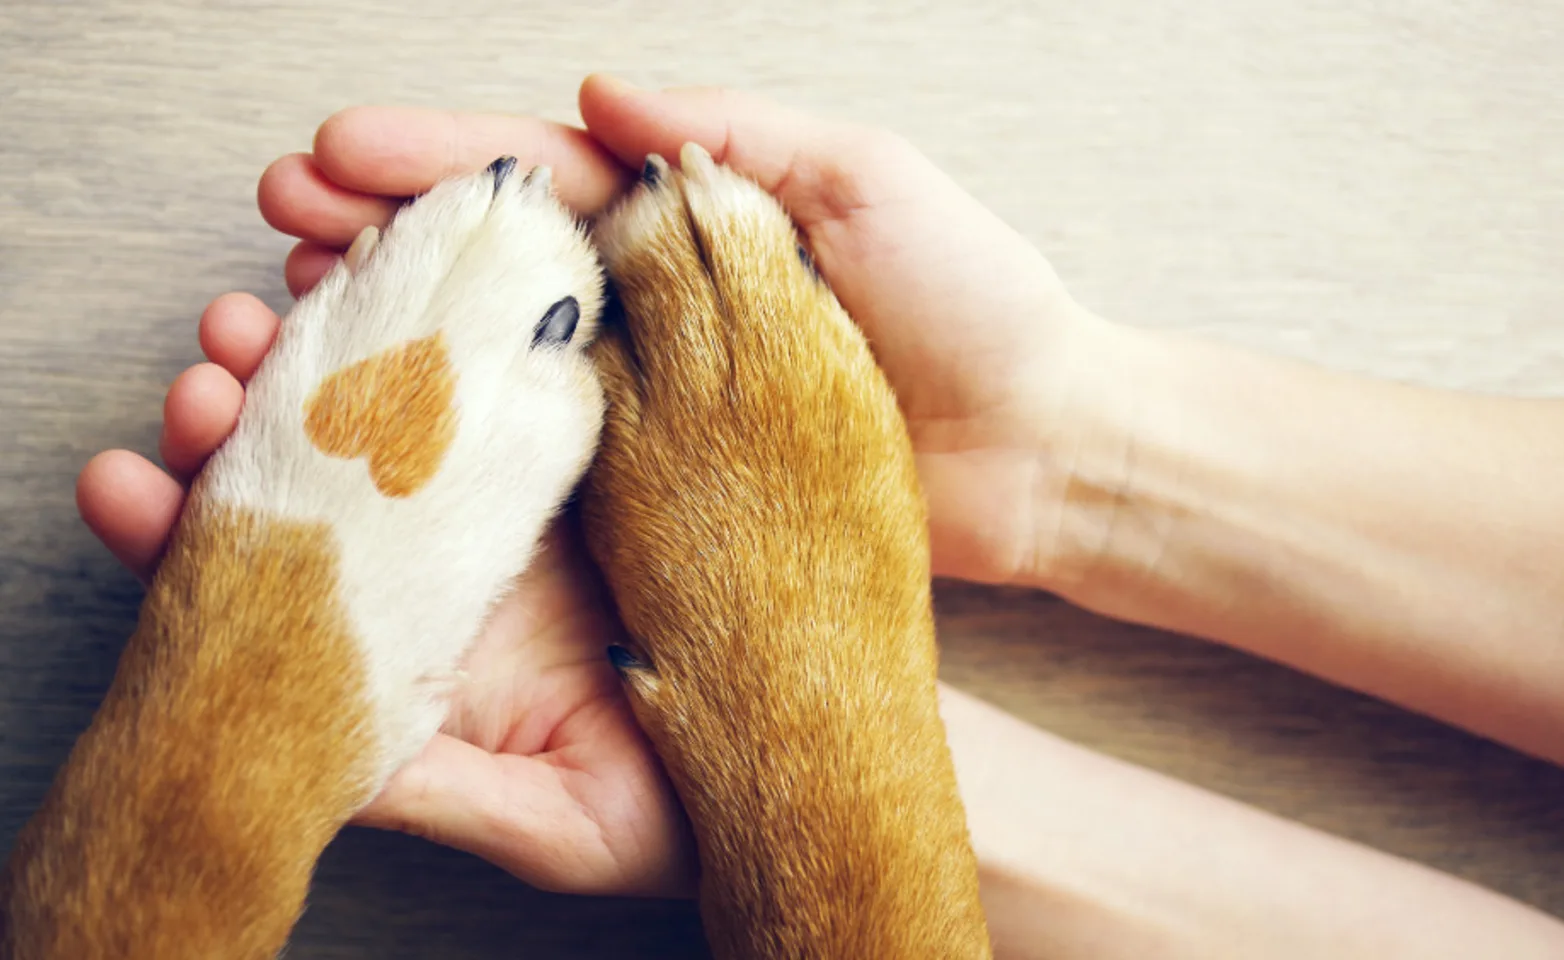 Tan and white paws with a heart print in human hands